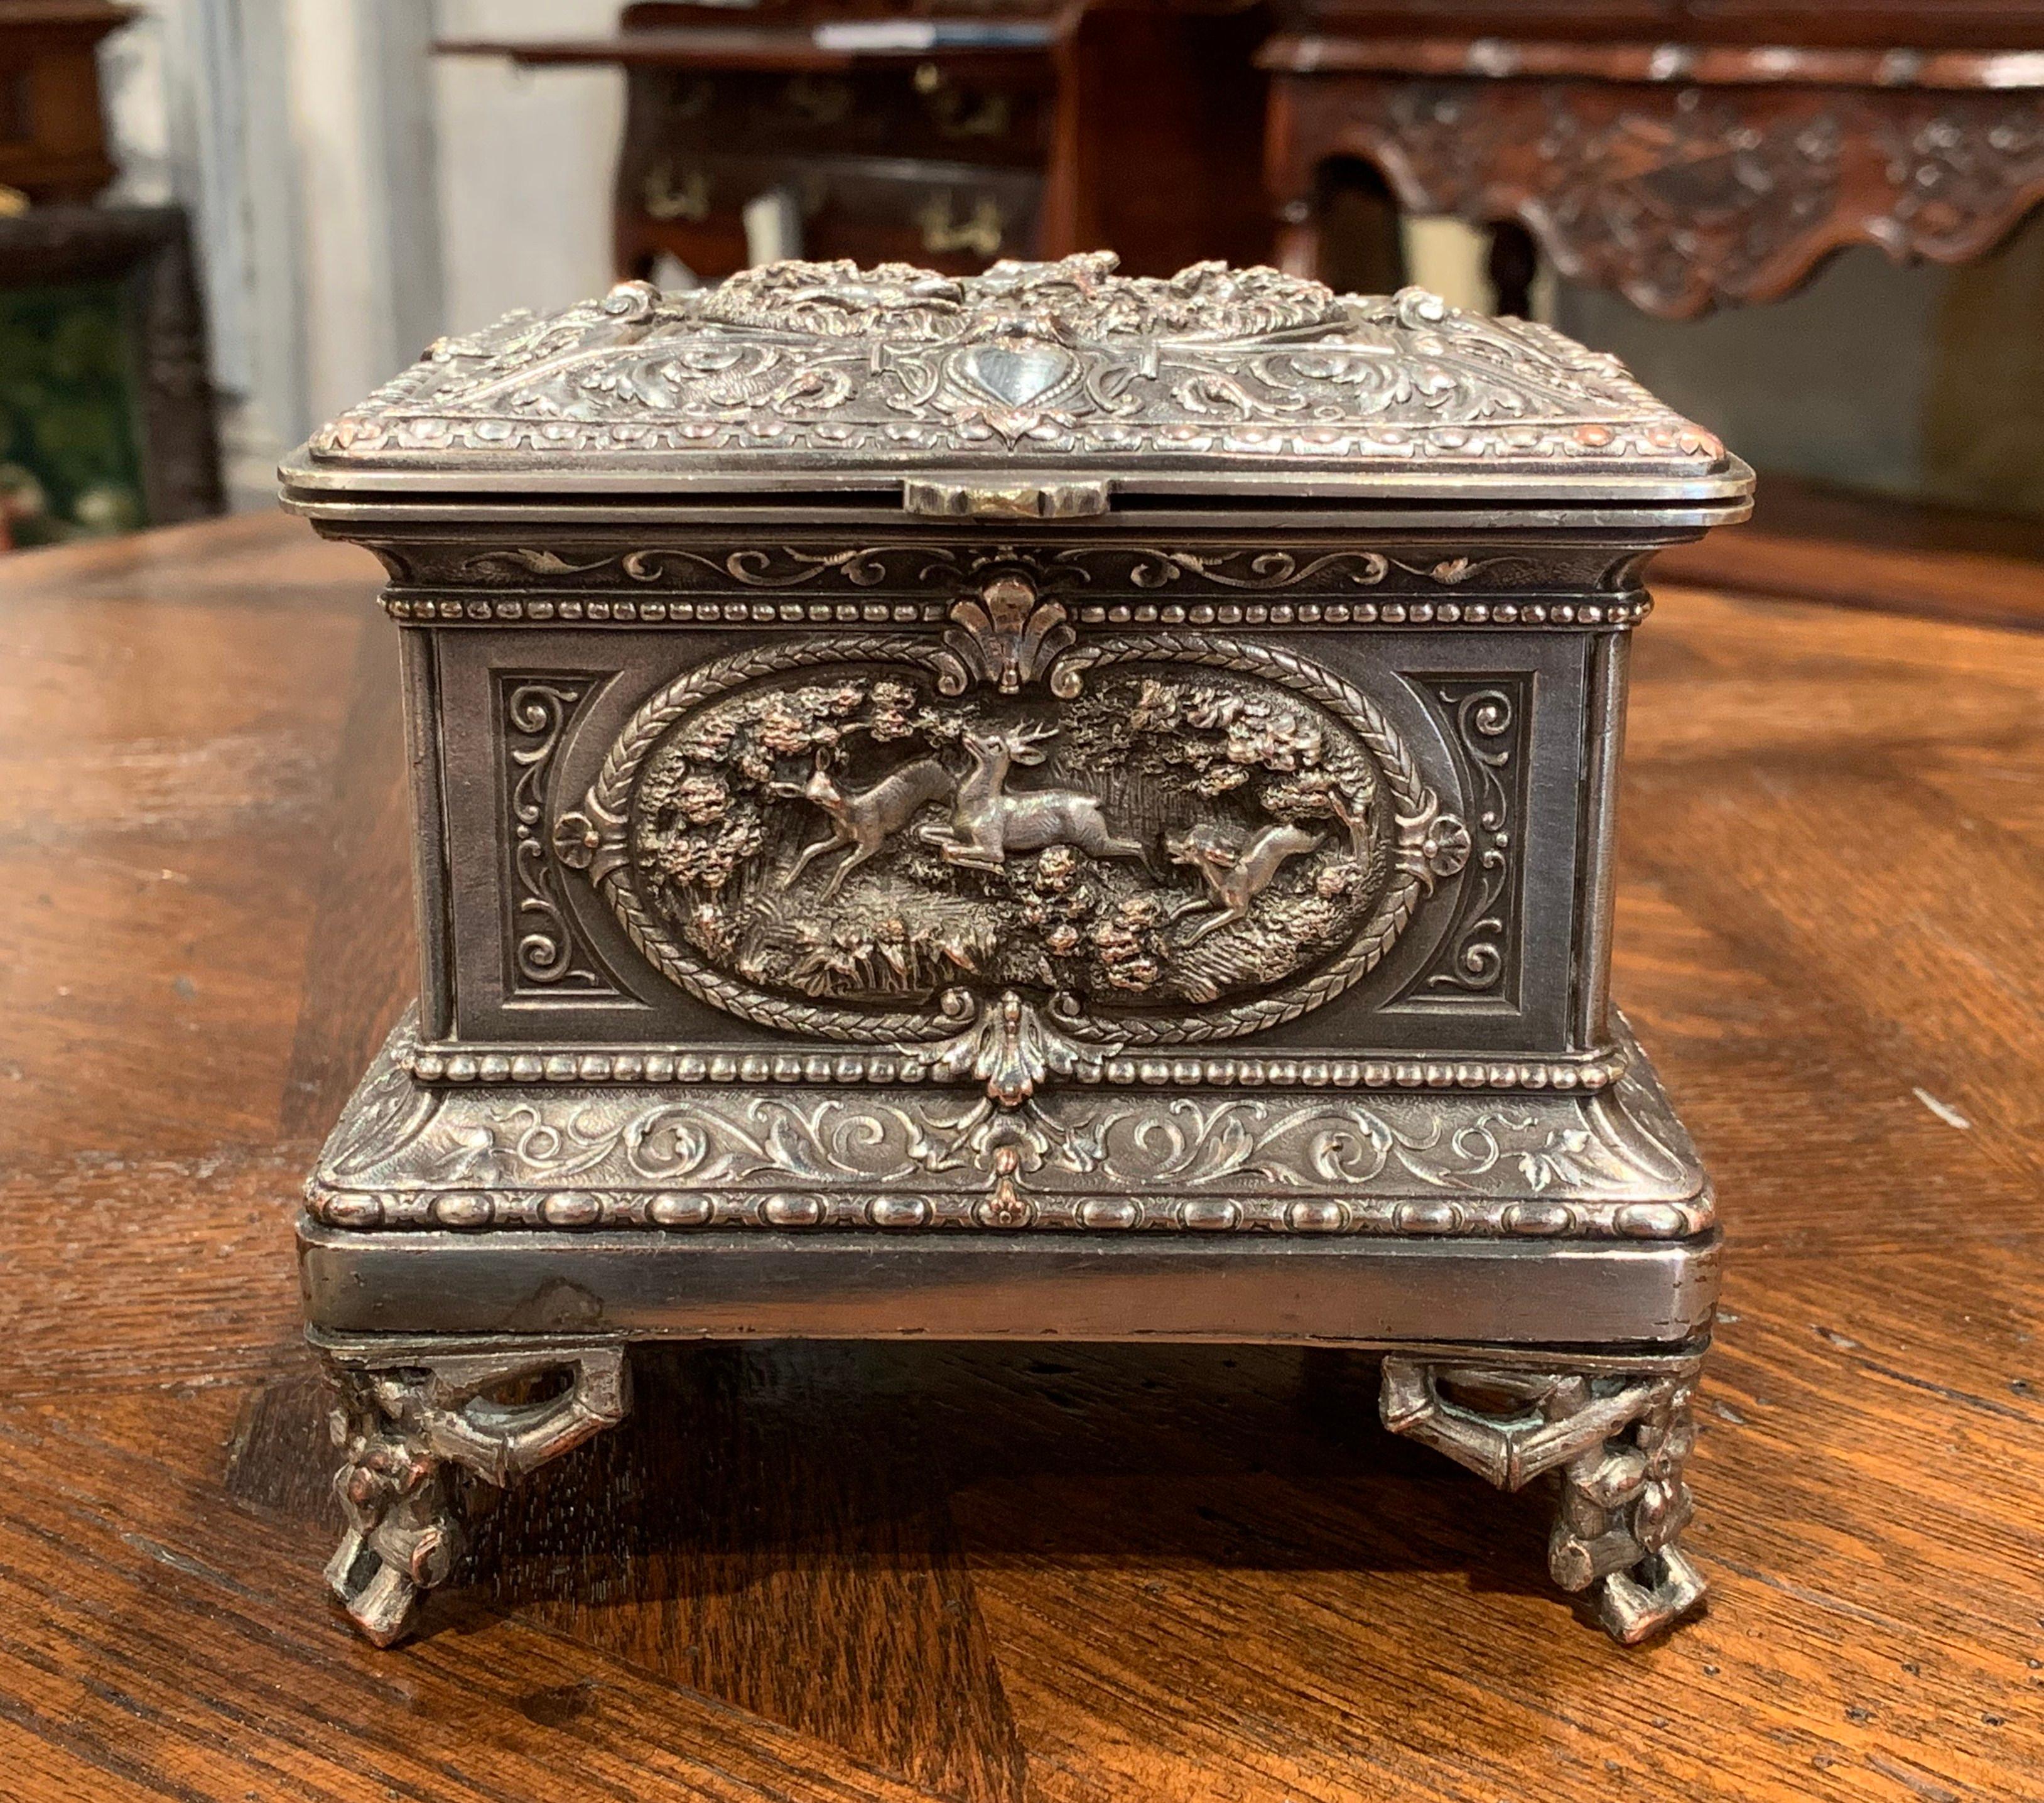 Place this elegant, antique Napoleon III copper box in your master bath to keep your jewelry safe and organized. Crafted in France circa 1880, the ornate square casket sits on four scroll feet, and all five sides including the top are embellished